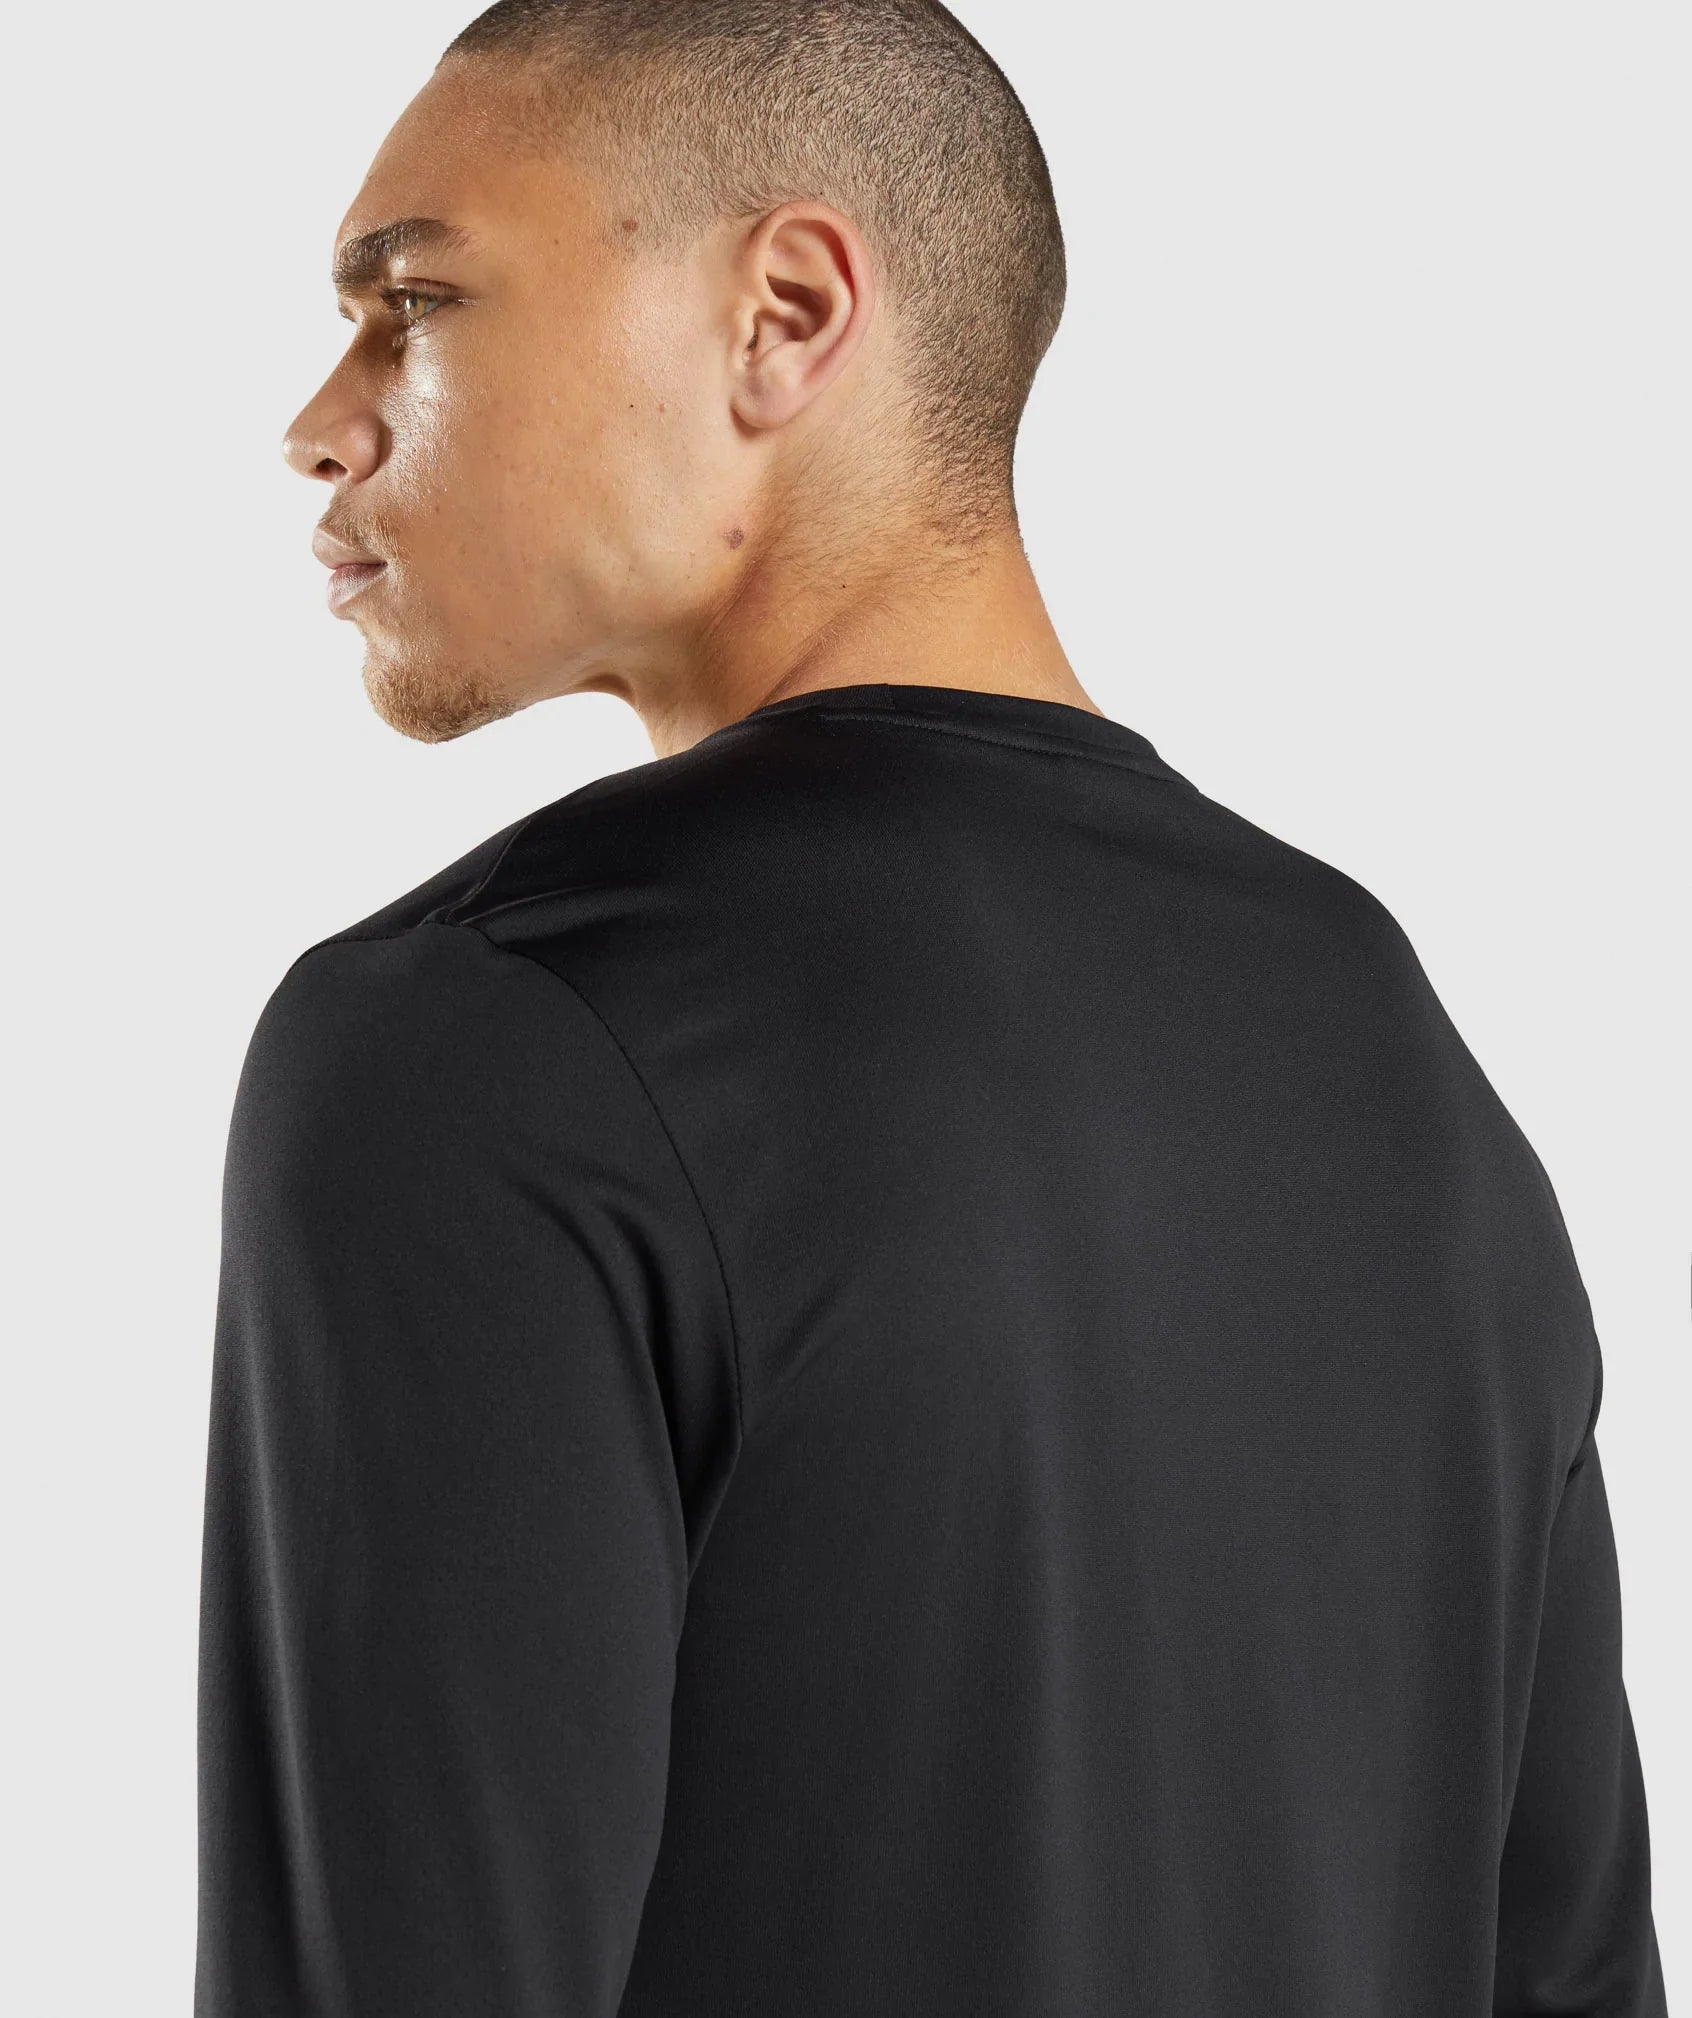 Arrival Long Sleeve T-Shirt in Black